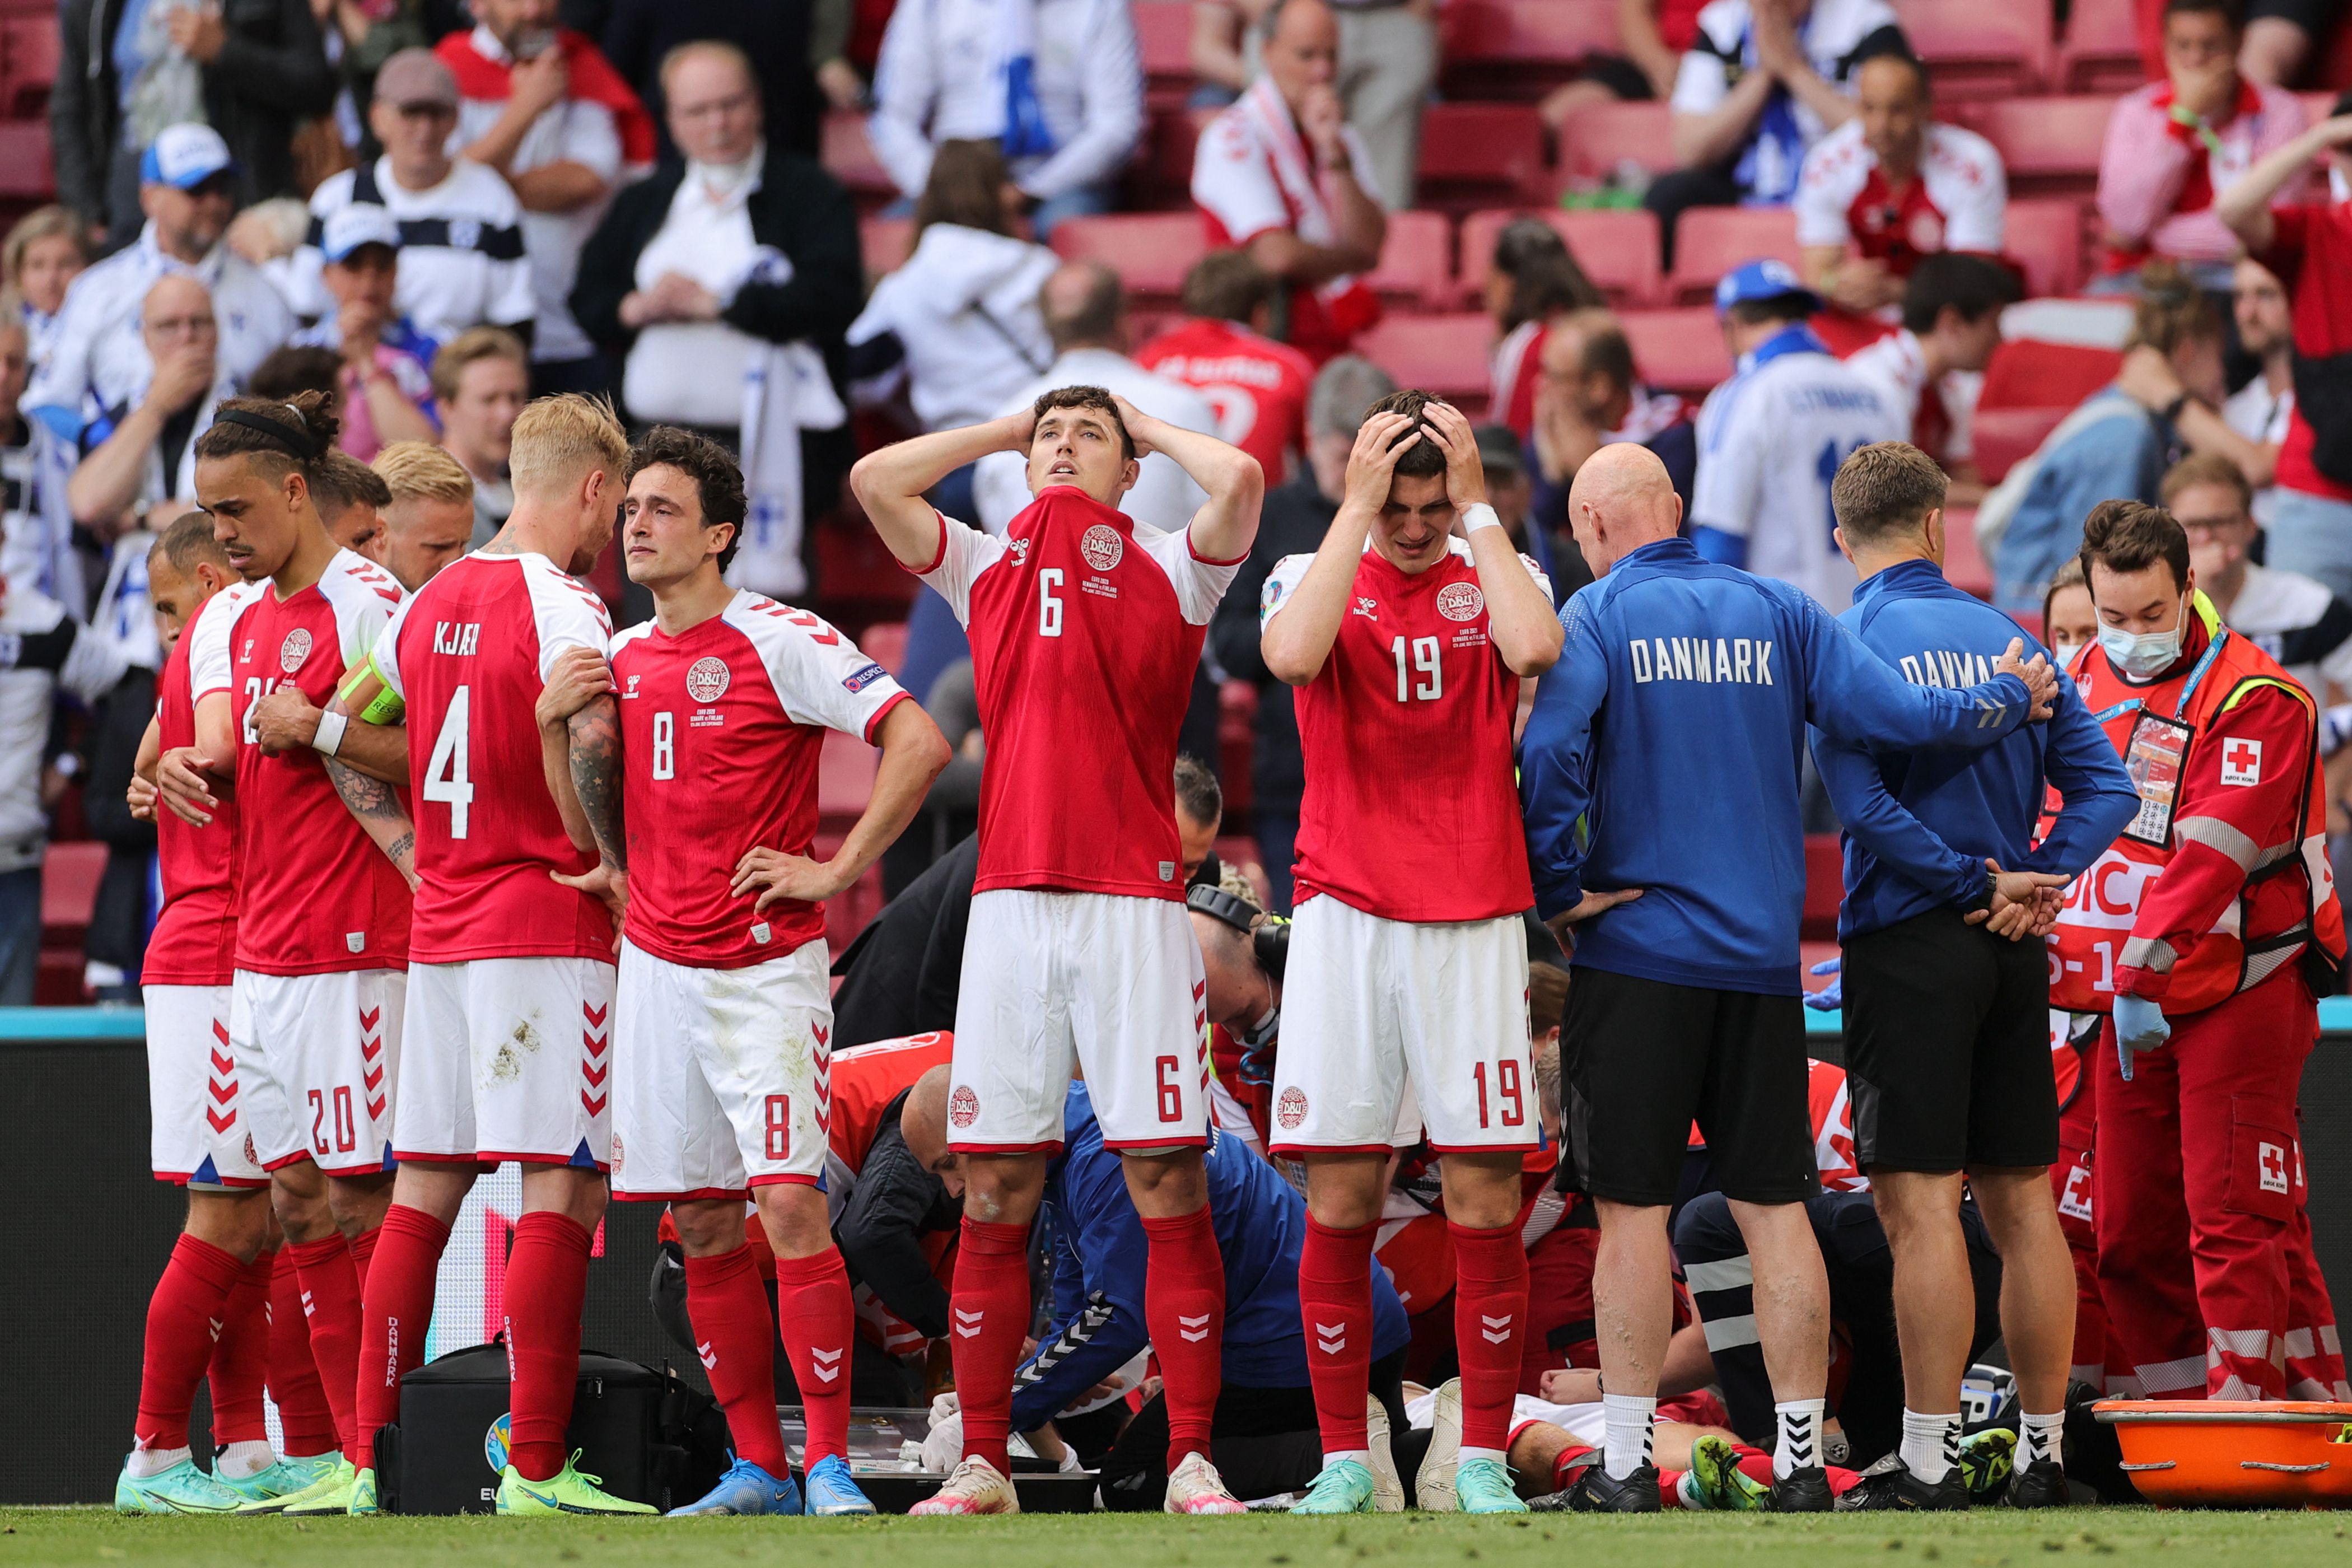 Denmark's players react as paramedics attend to Denmark's midfielder Christian Eriksen after he collapsed on the pitch during the UEFA EURO 2020 Group B football match between Denmark and Finland at the Parken Stadium in Copenhagen on June 12, 2021. 